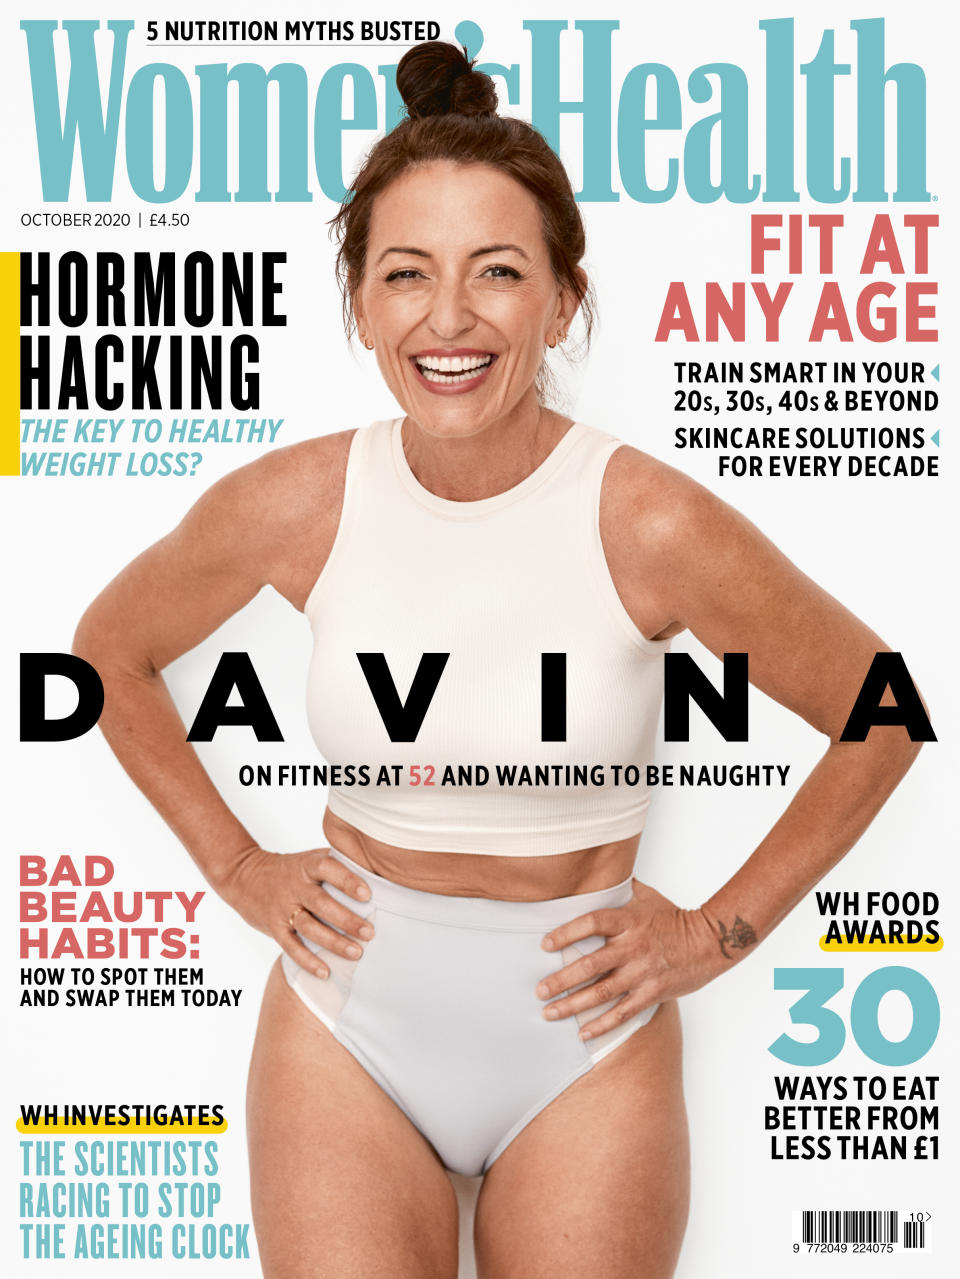 Davina McCall has appeared on the cover of the October Issue of Women's Health magazine. (Ian Harrison/Women's Health)